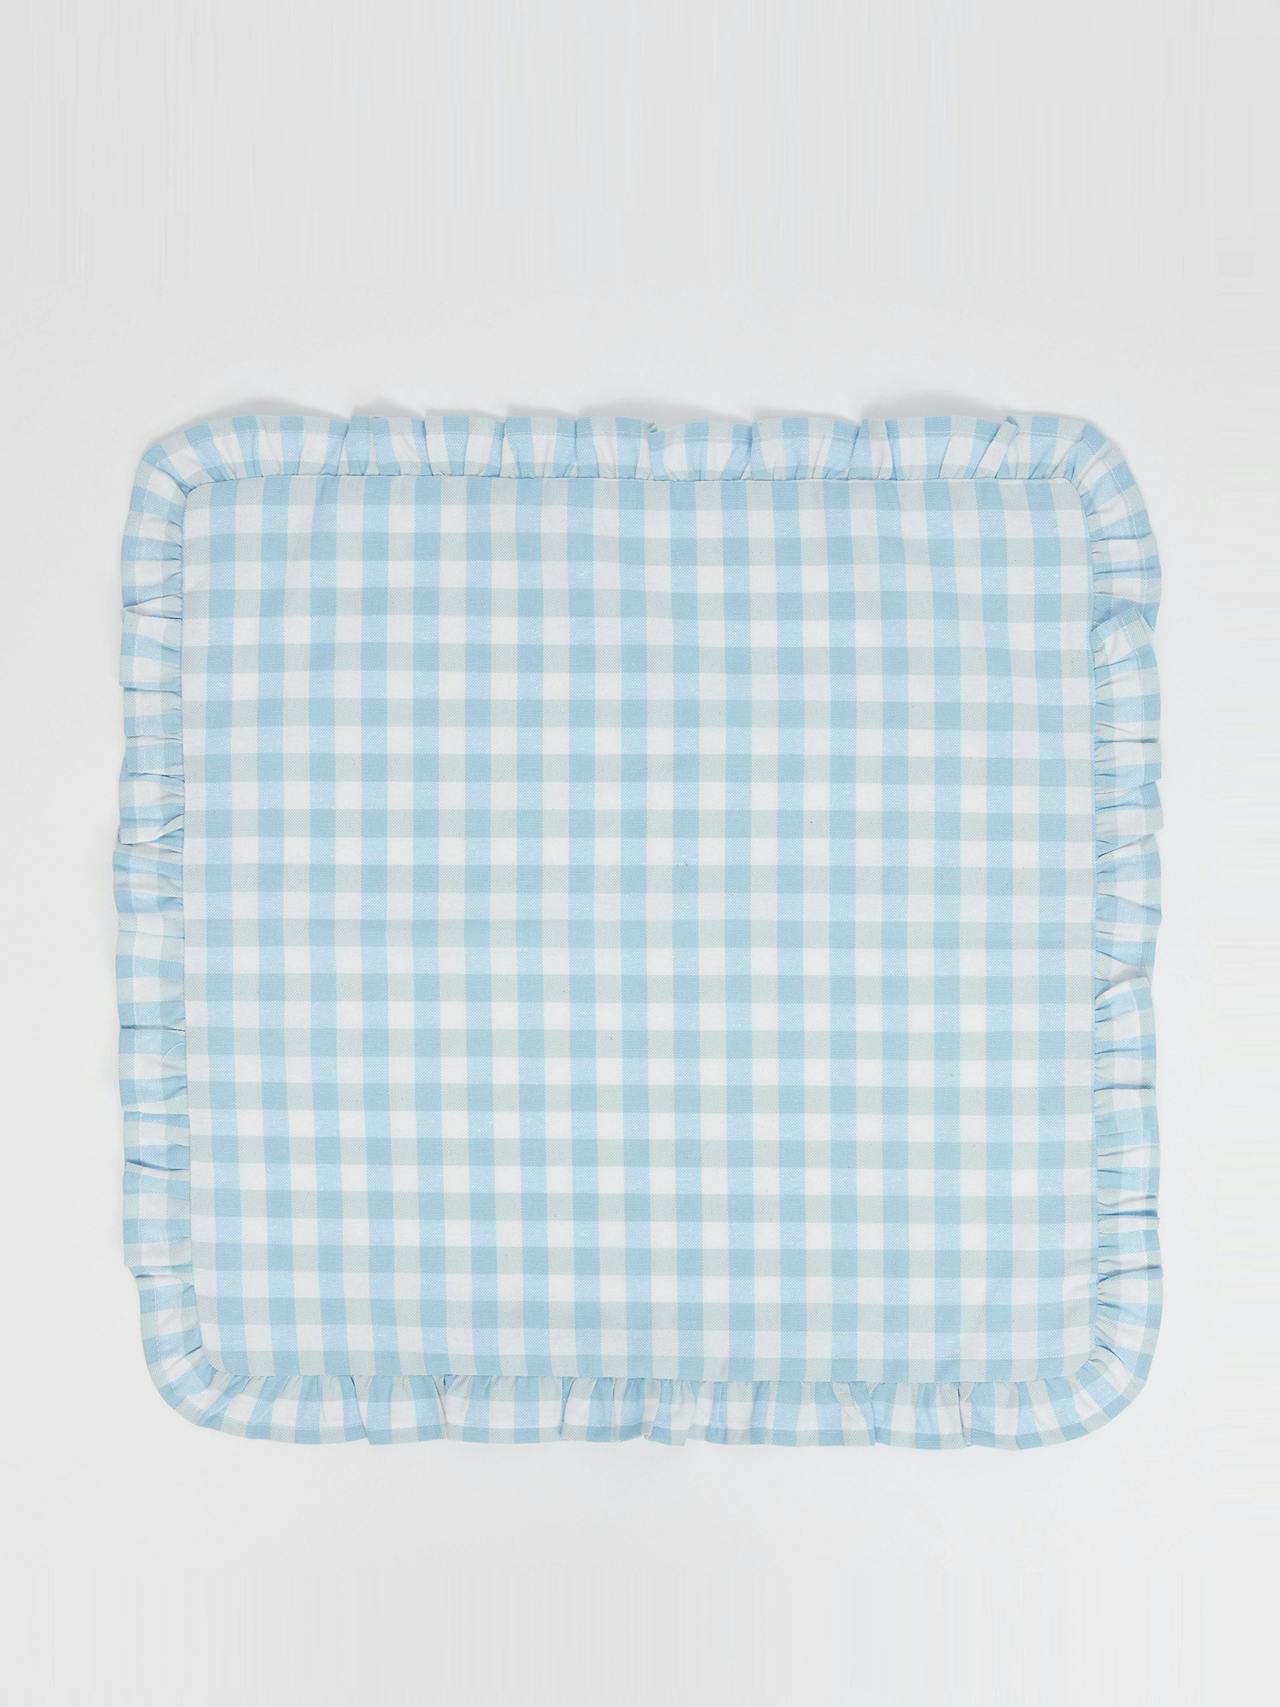 Soft blue gingham placemats, set of 4